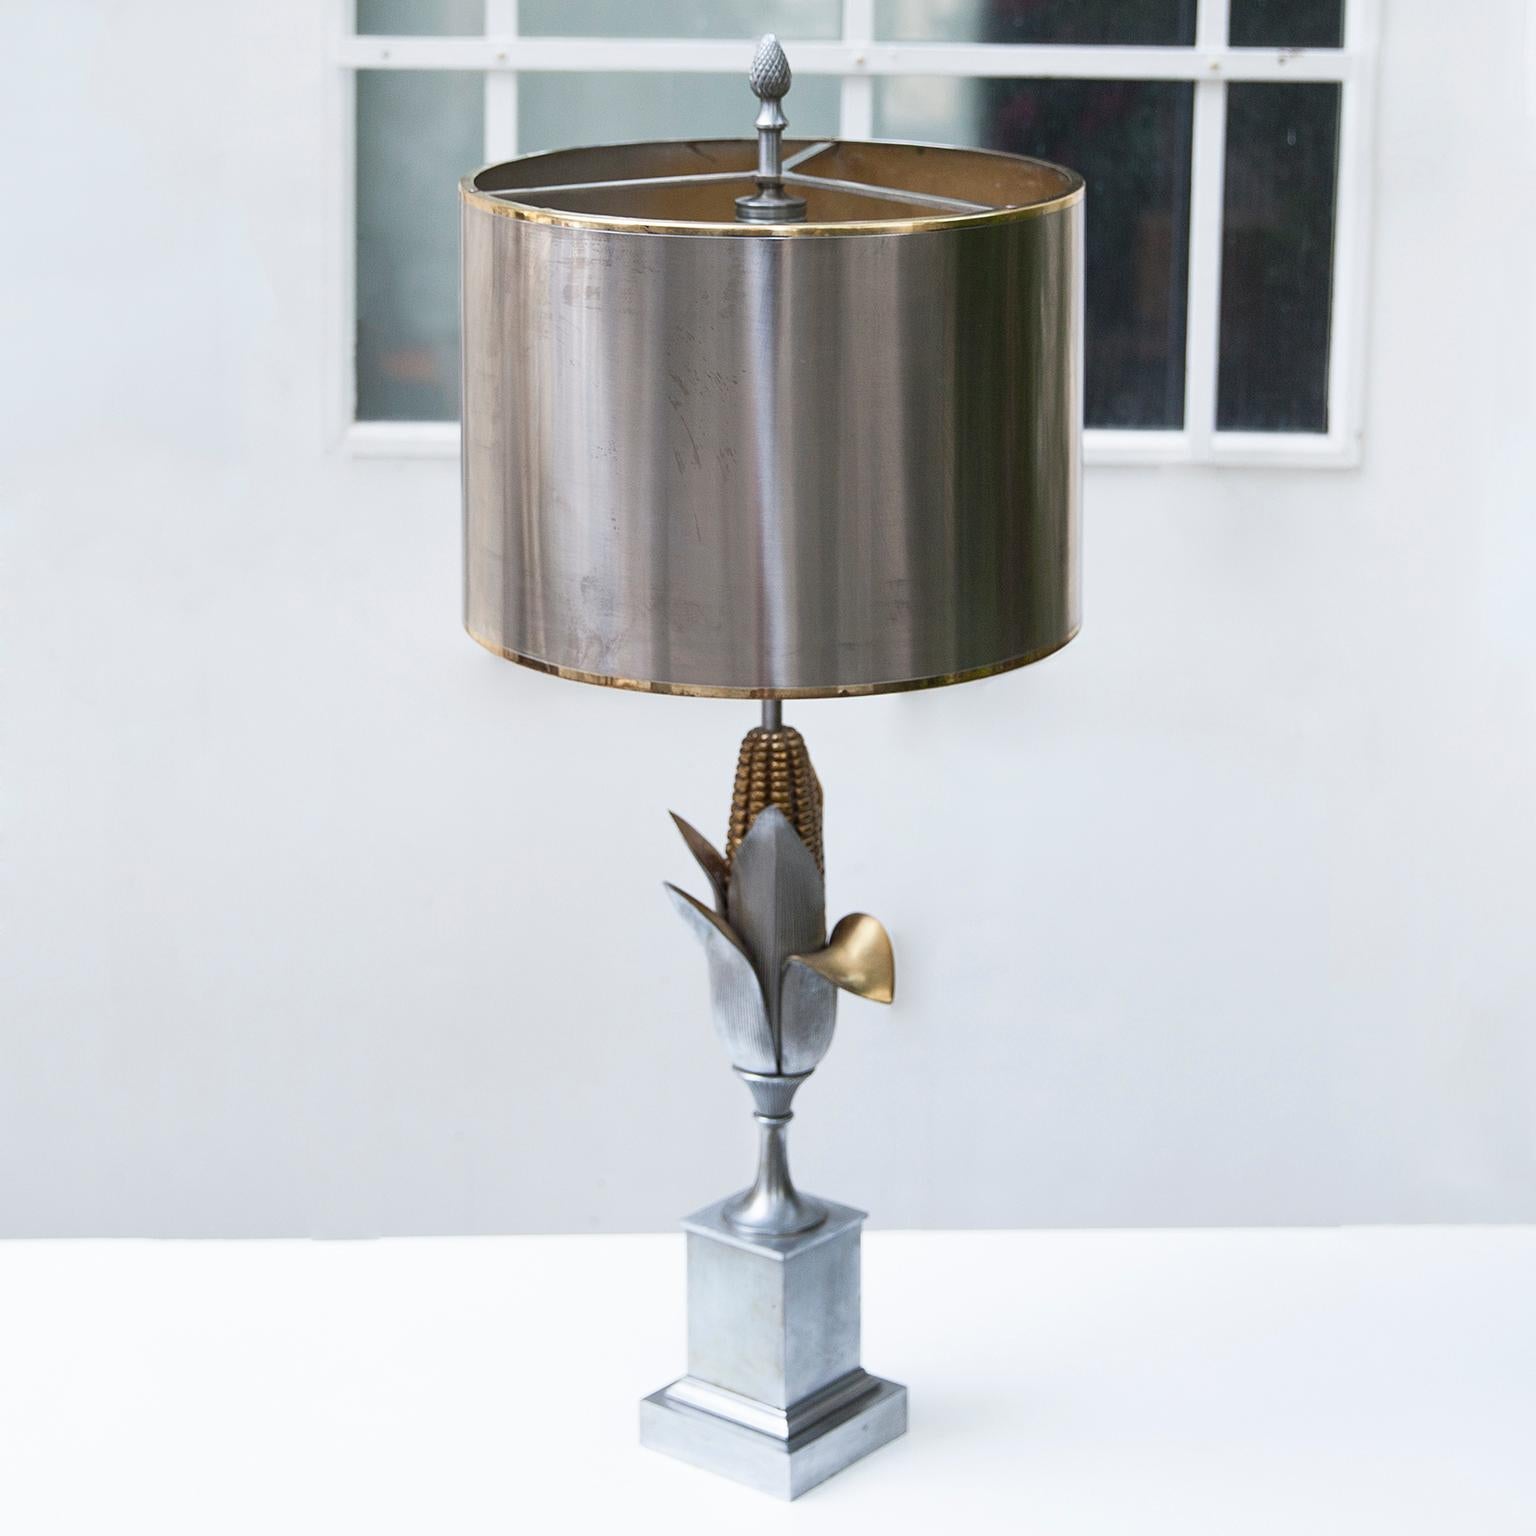 Elegant table lamp made by Maison Charles, Paris in 1970s.

Bicolored bronze and steel, signed on the base.

